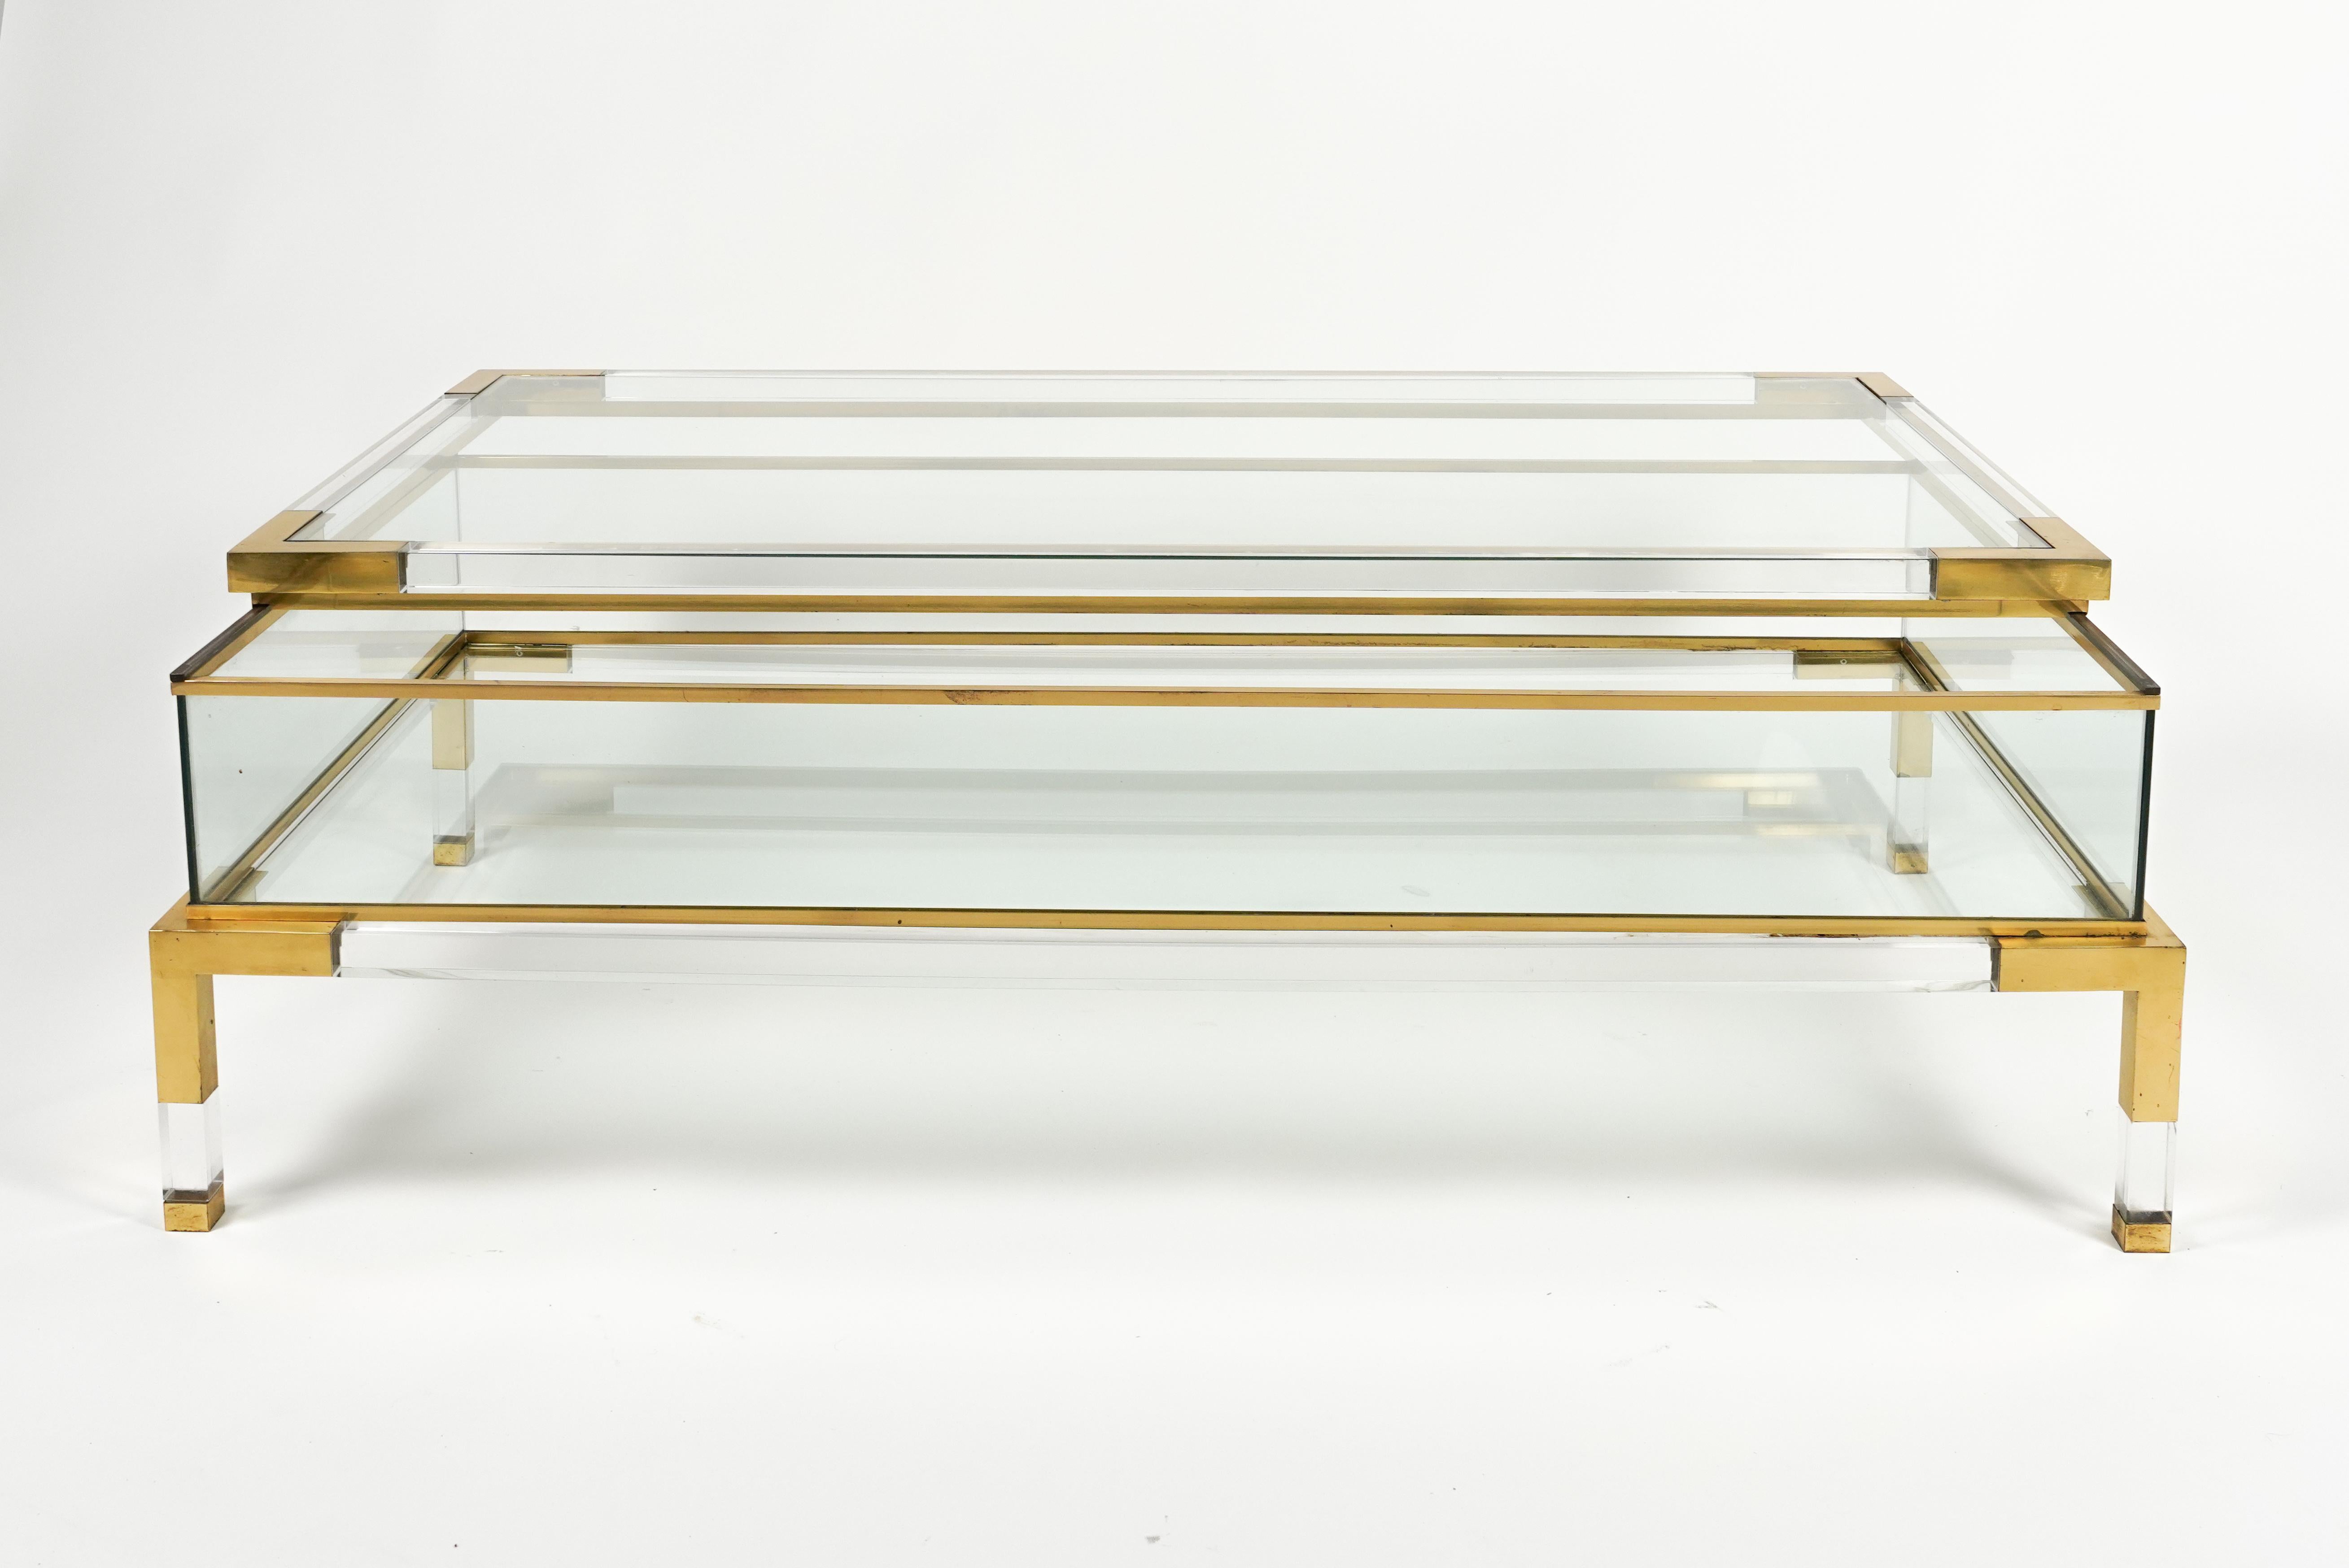 Midcentury Coffee Table in Lucite, Brass & Glass by Maison Jansen, France 1970s For Sale 4